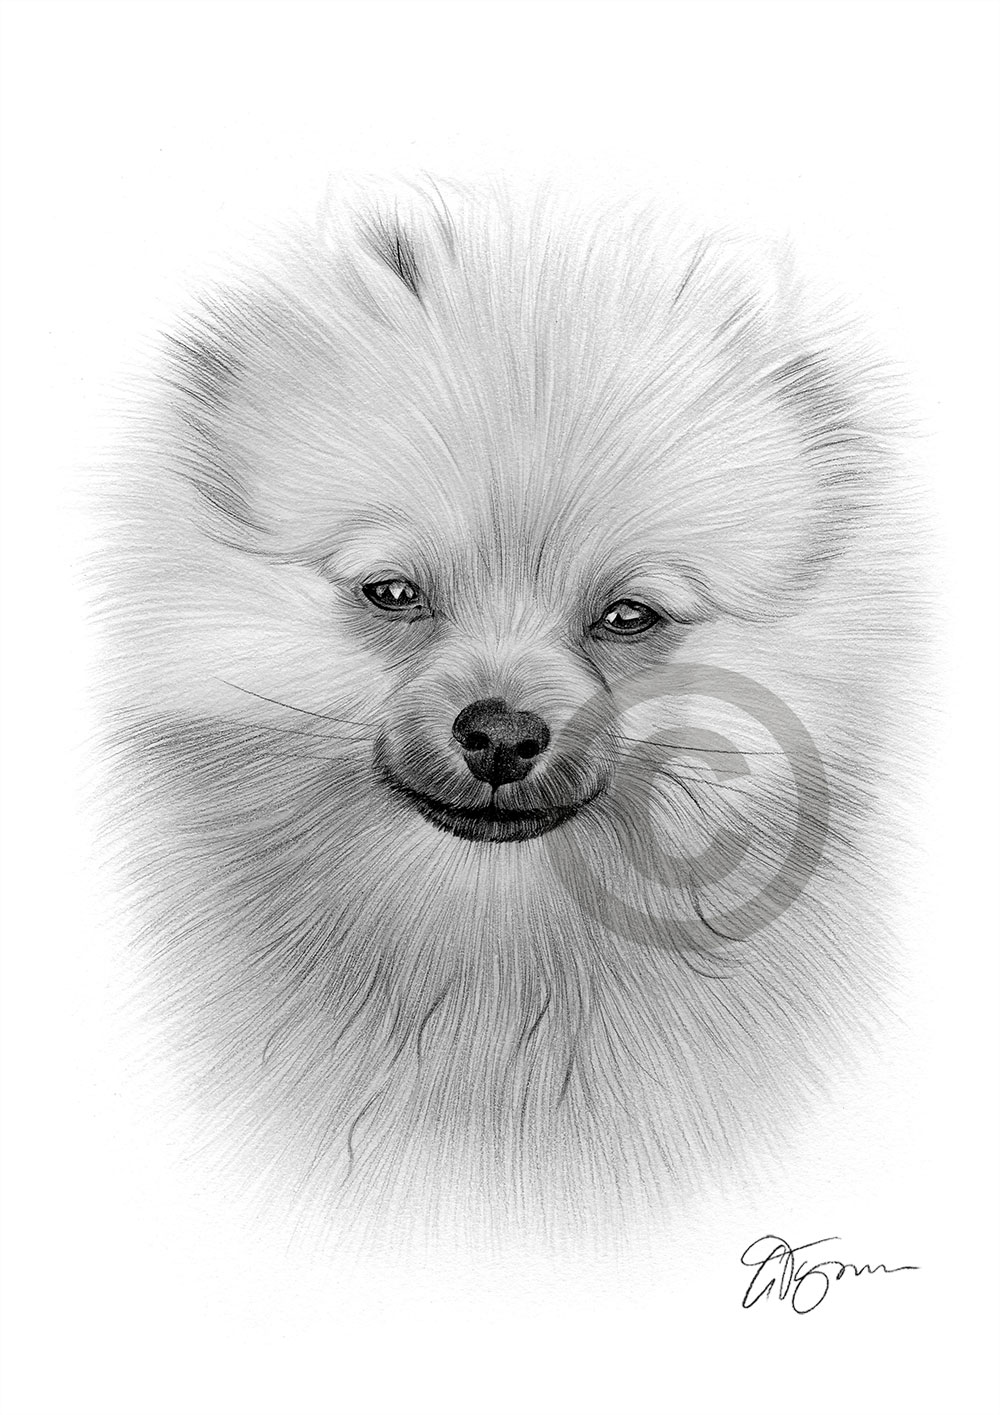 Pencil drawing of a young Pomeranian puppy by UK artist Gary Tymon